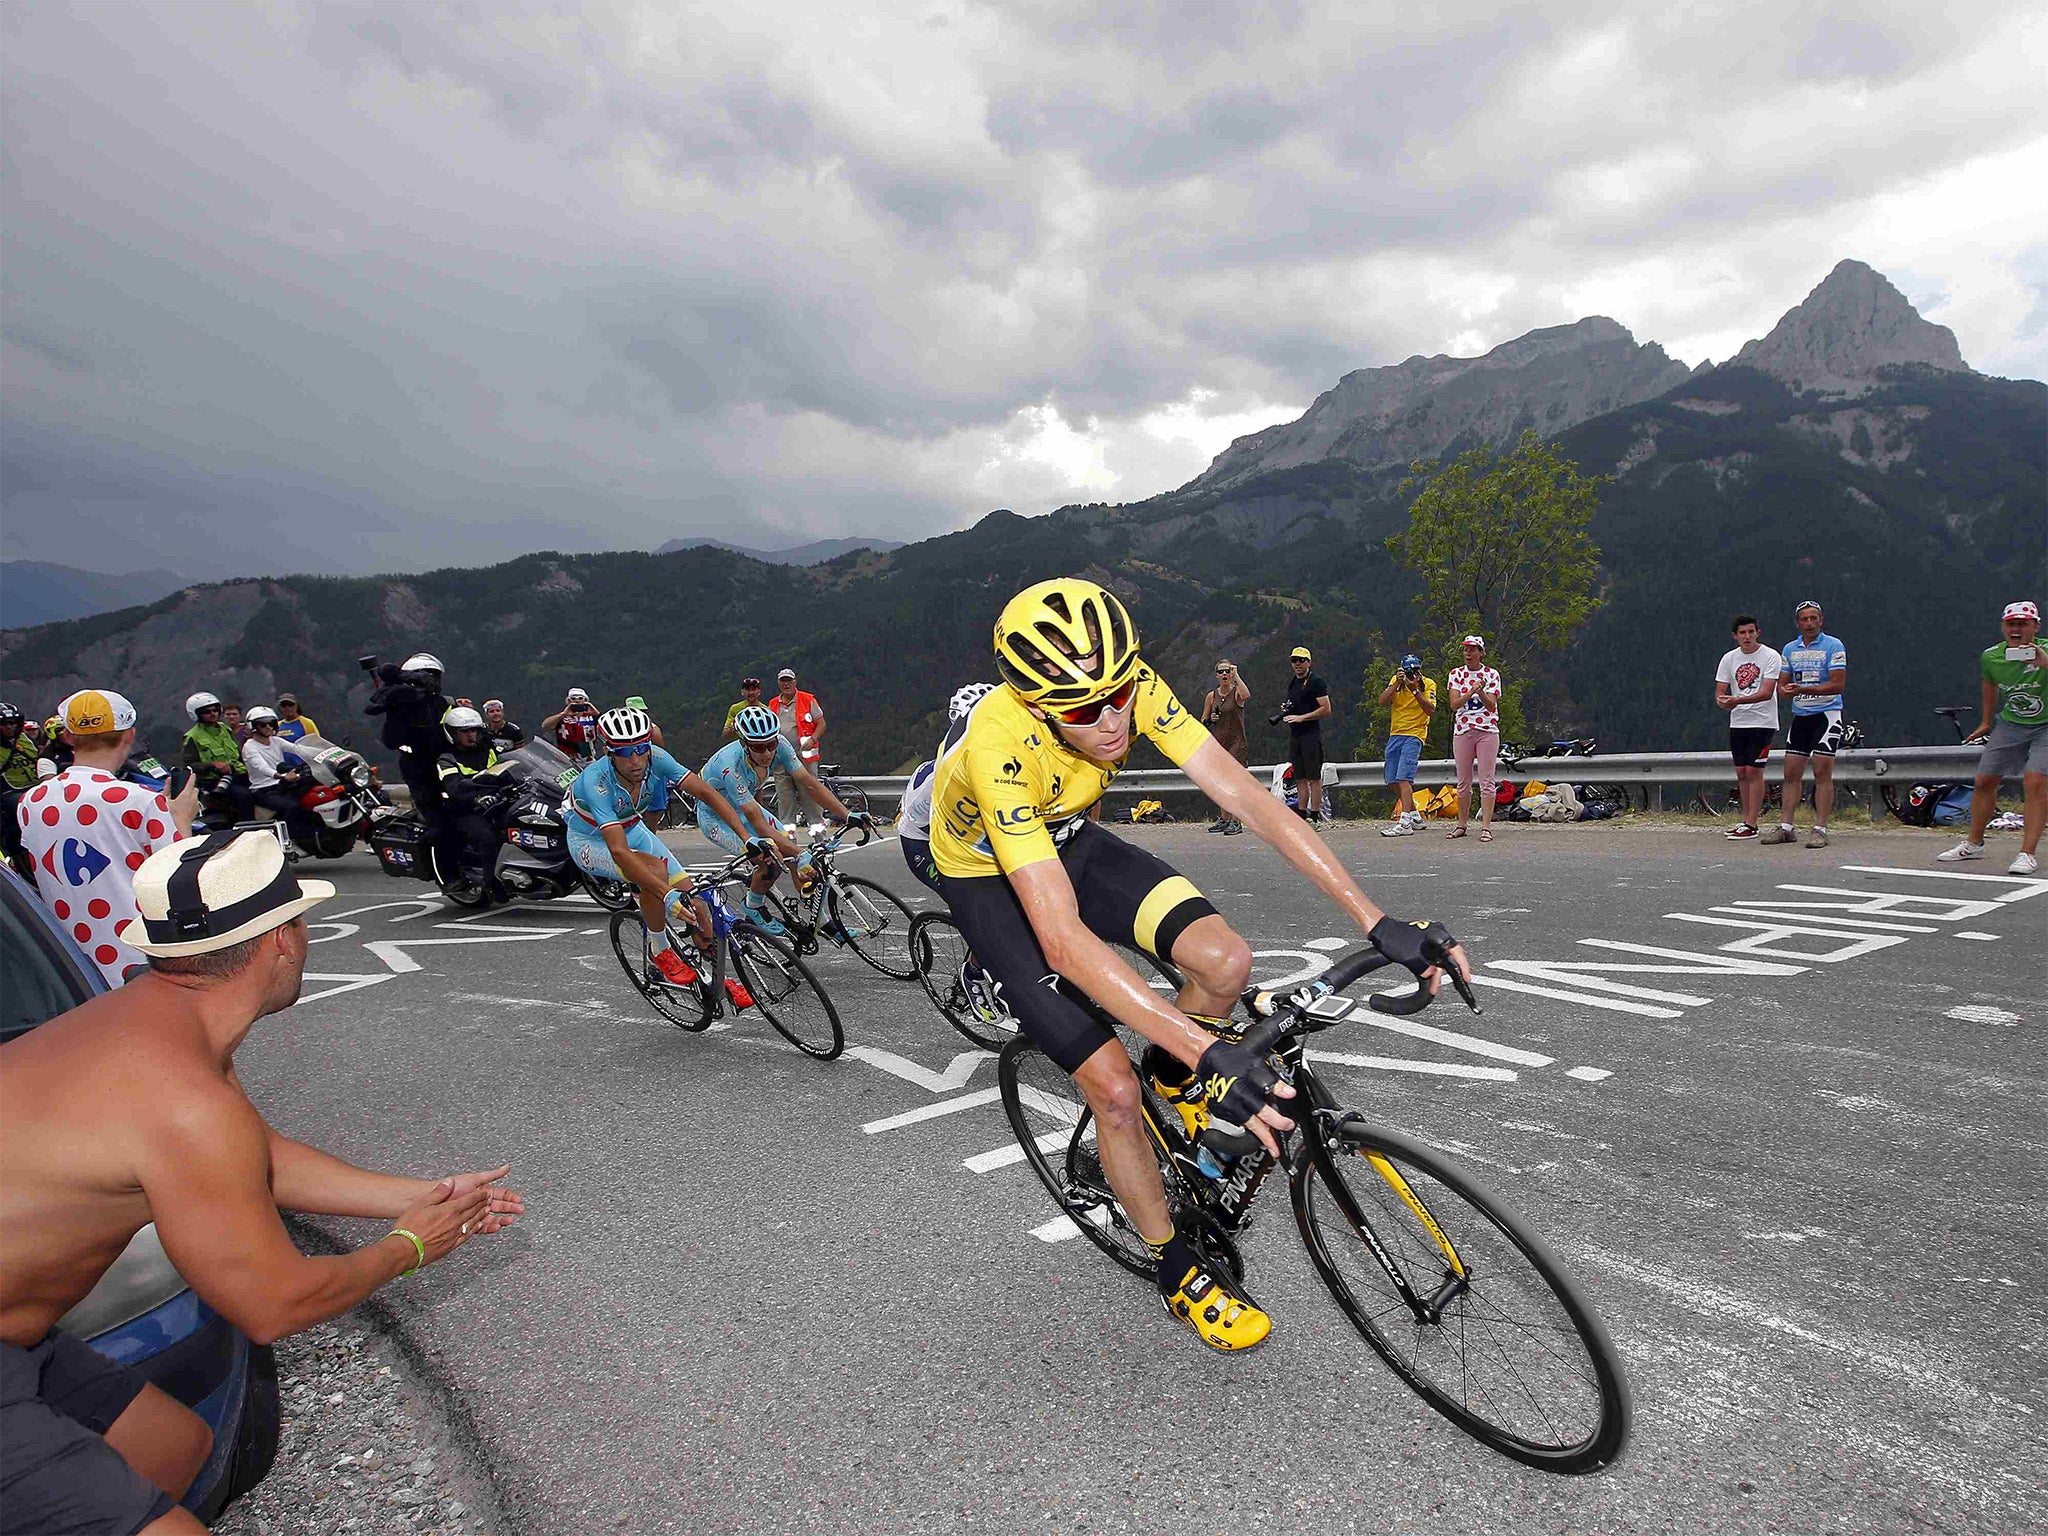 Chris Froome, wearing the leader’s yellow jersey, is followed by Vincenzo Nibali during the 17th stage of the Tour de France from Digne-les-Bains to Pra Loup in the Alps